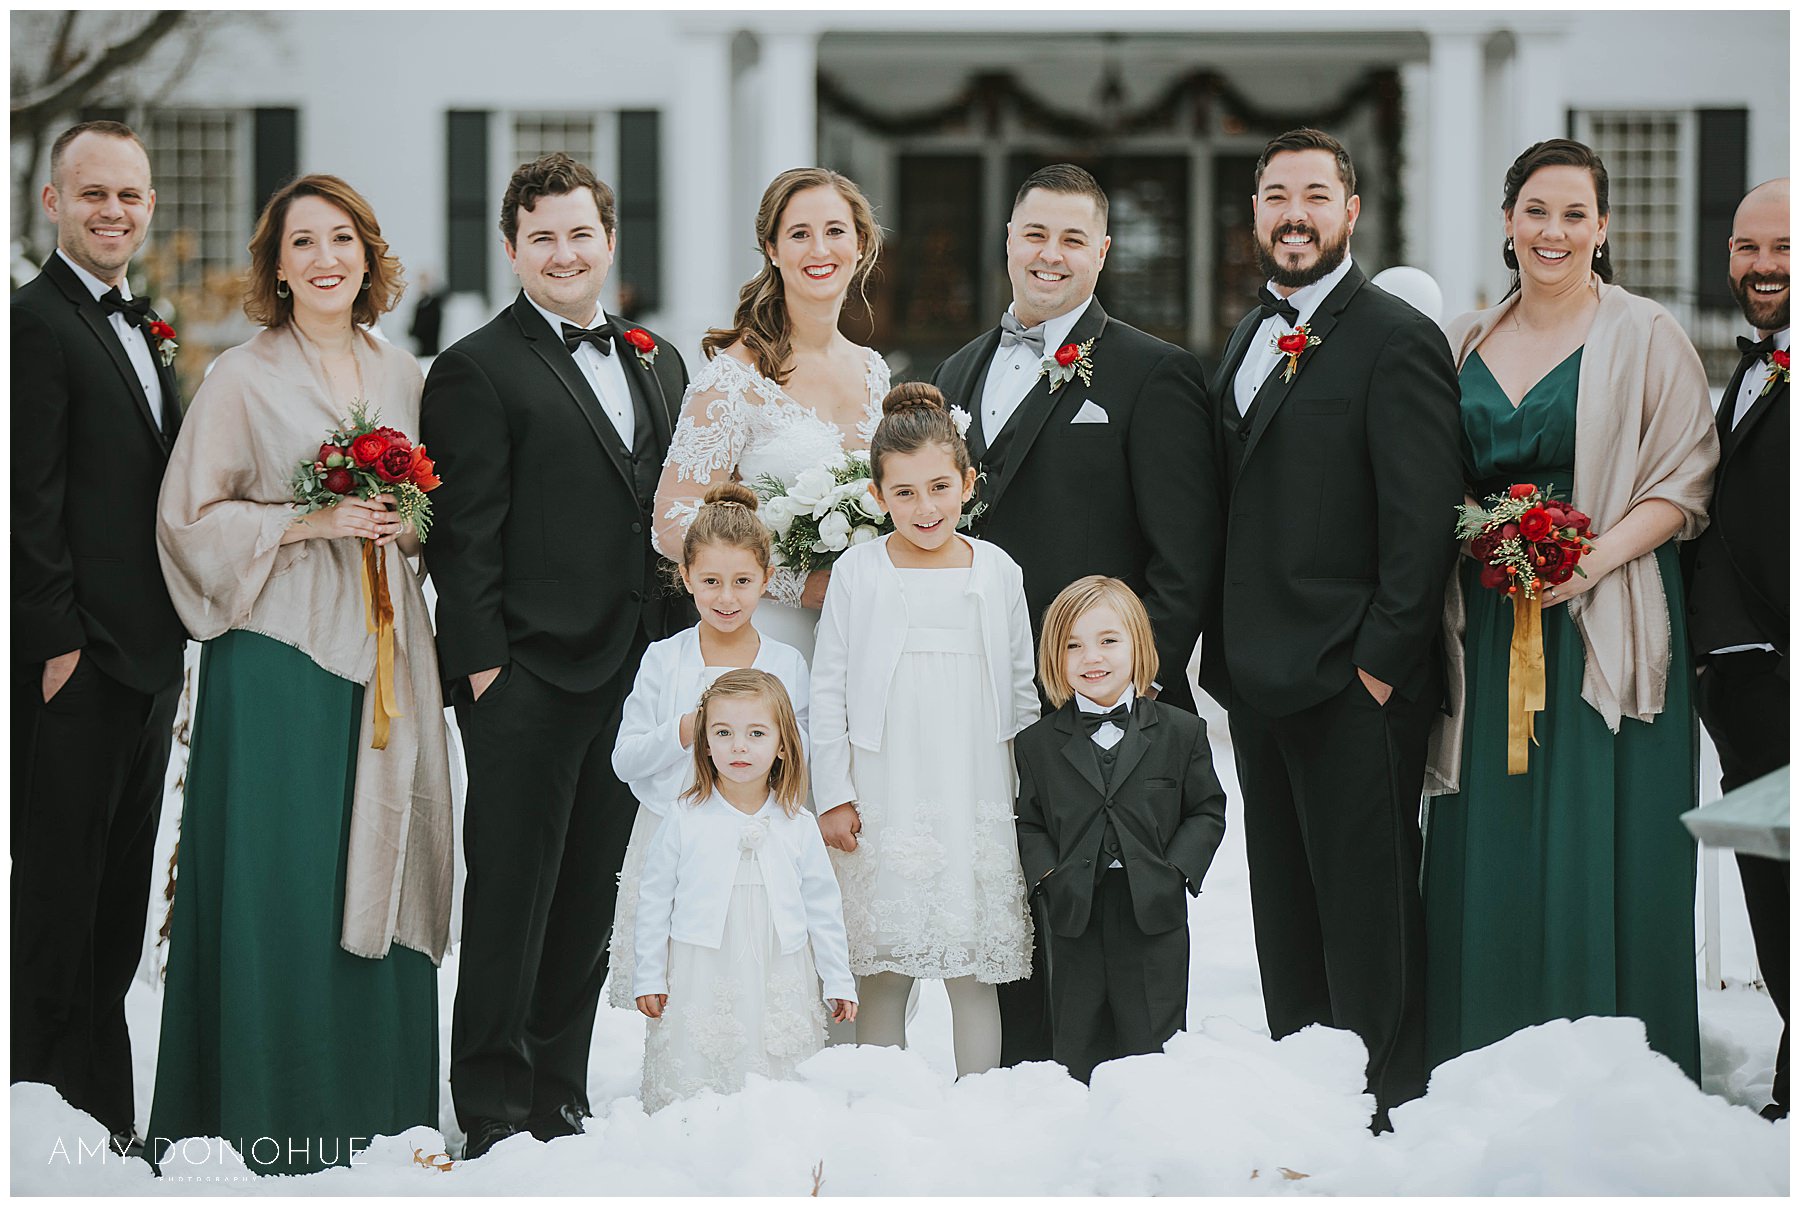 Natural Bridal Party Portraits in Winter | Woodstock Inn & Resort | VT Wedding Photographer | © Amy Donohue Photography